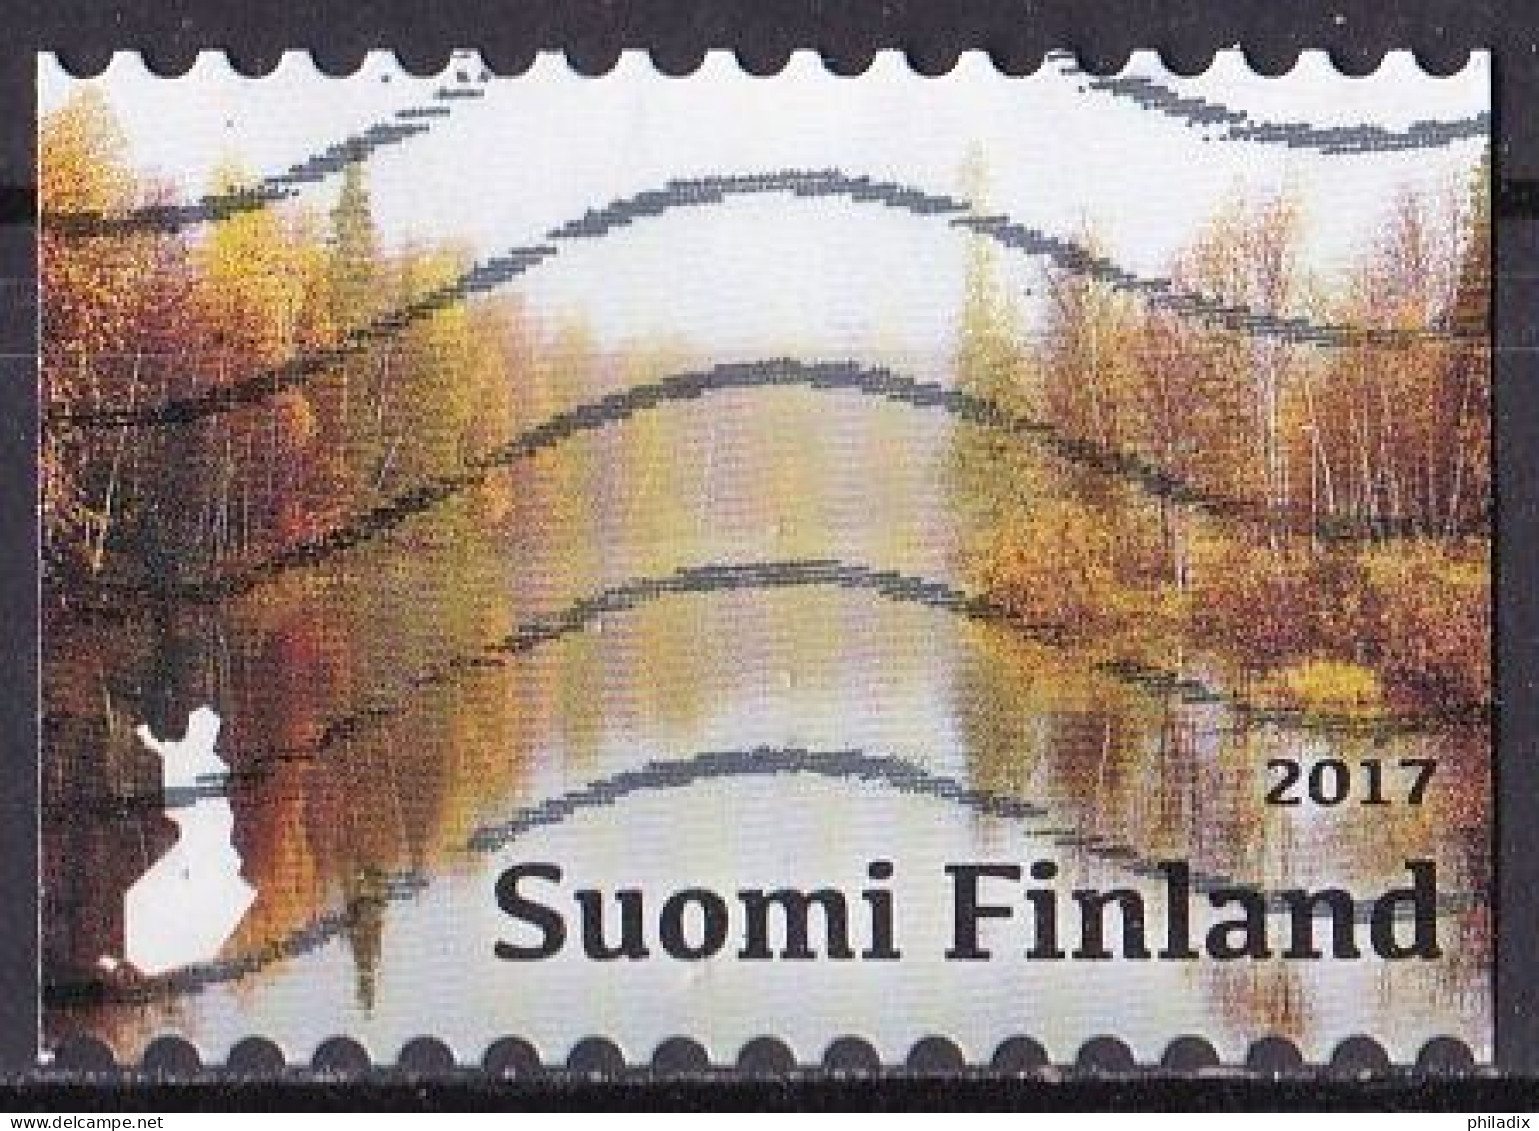 Finnland Marke Von 2017 O/used (A4-14) - Used Stamps